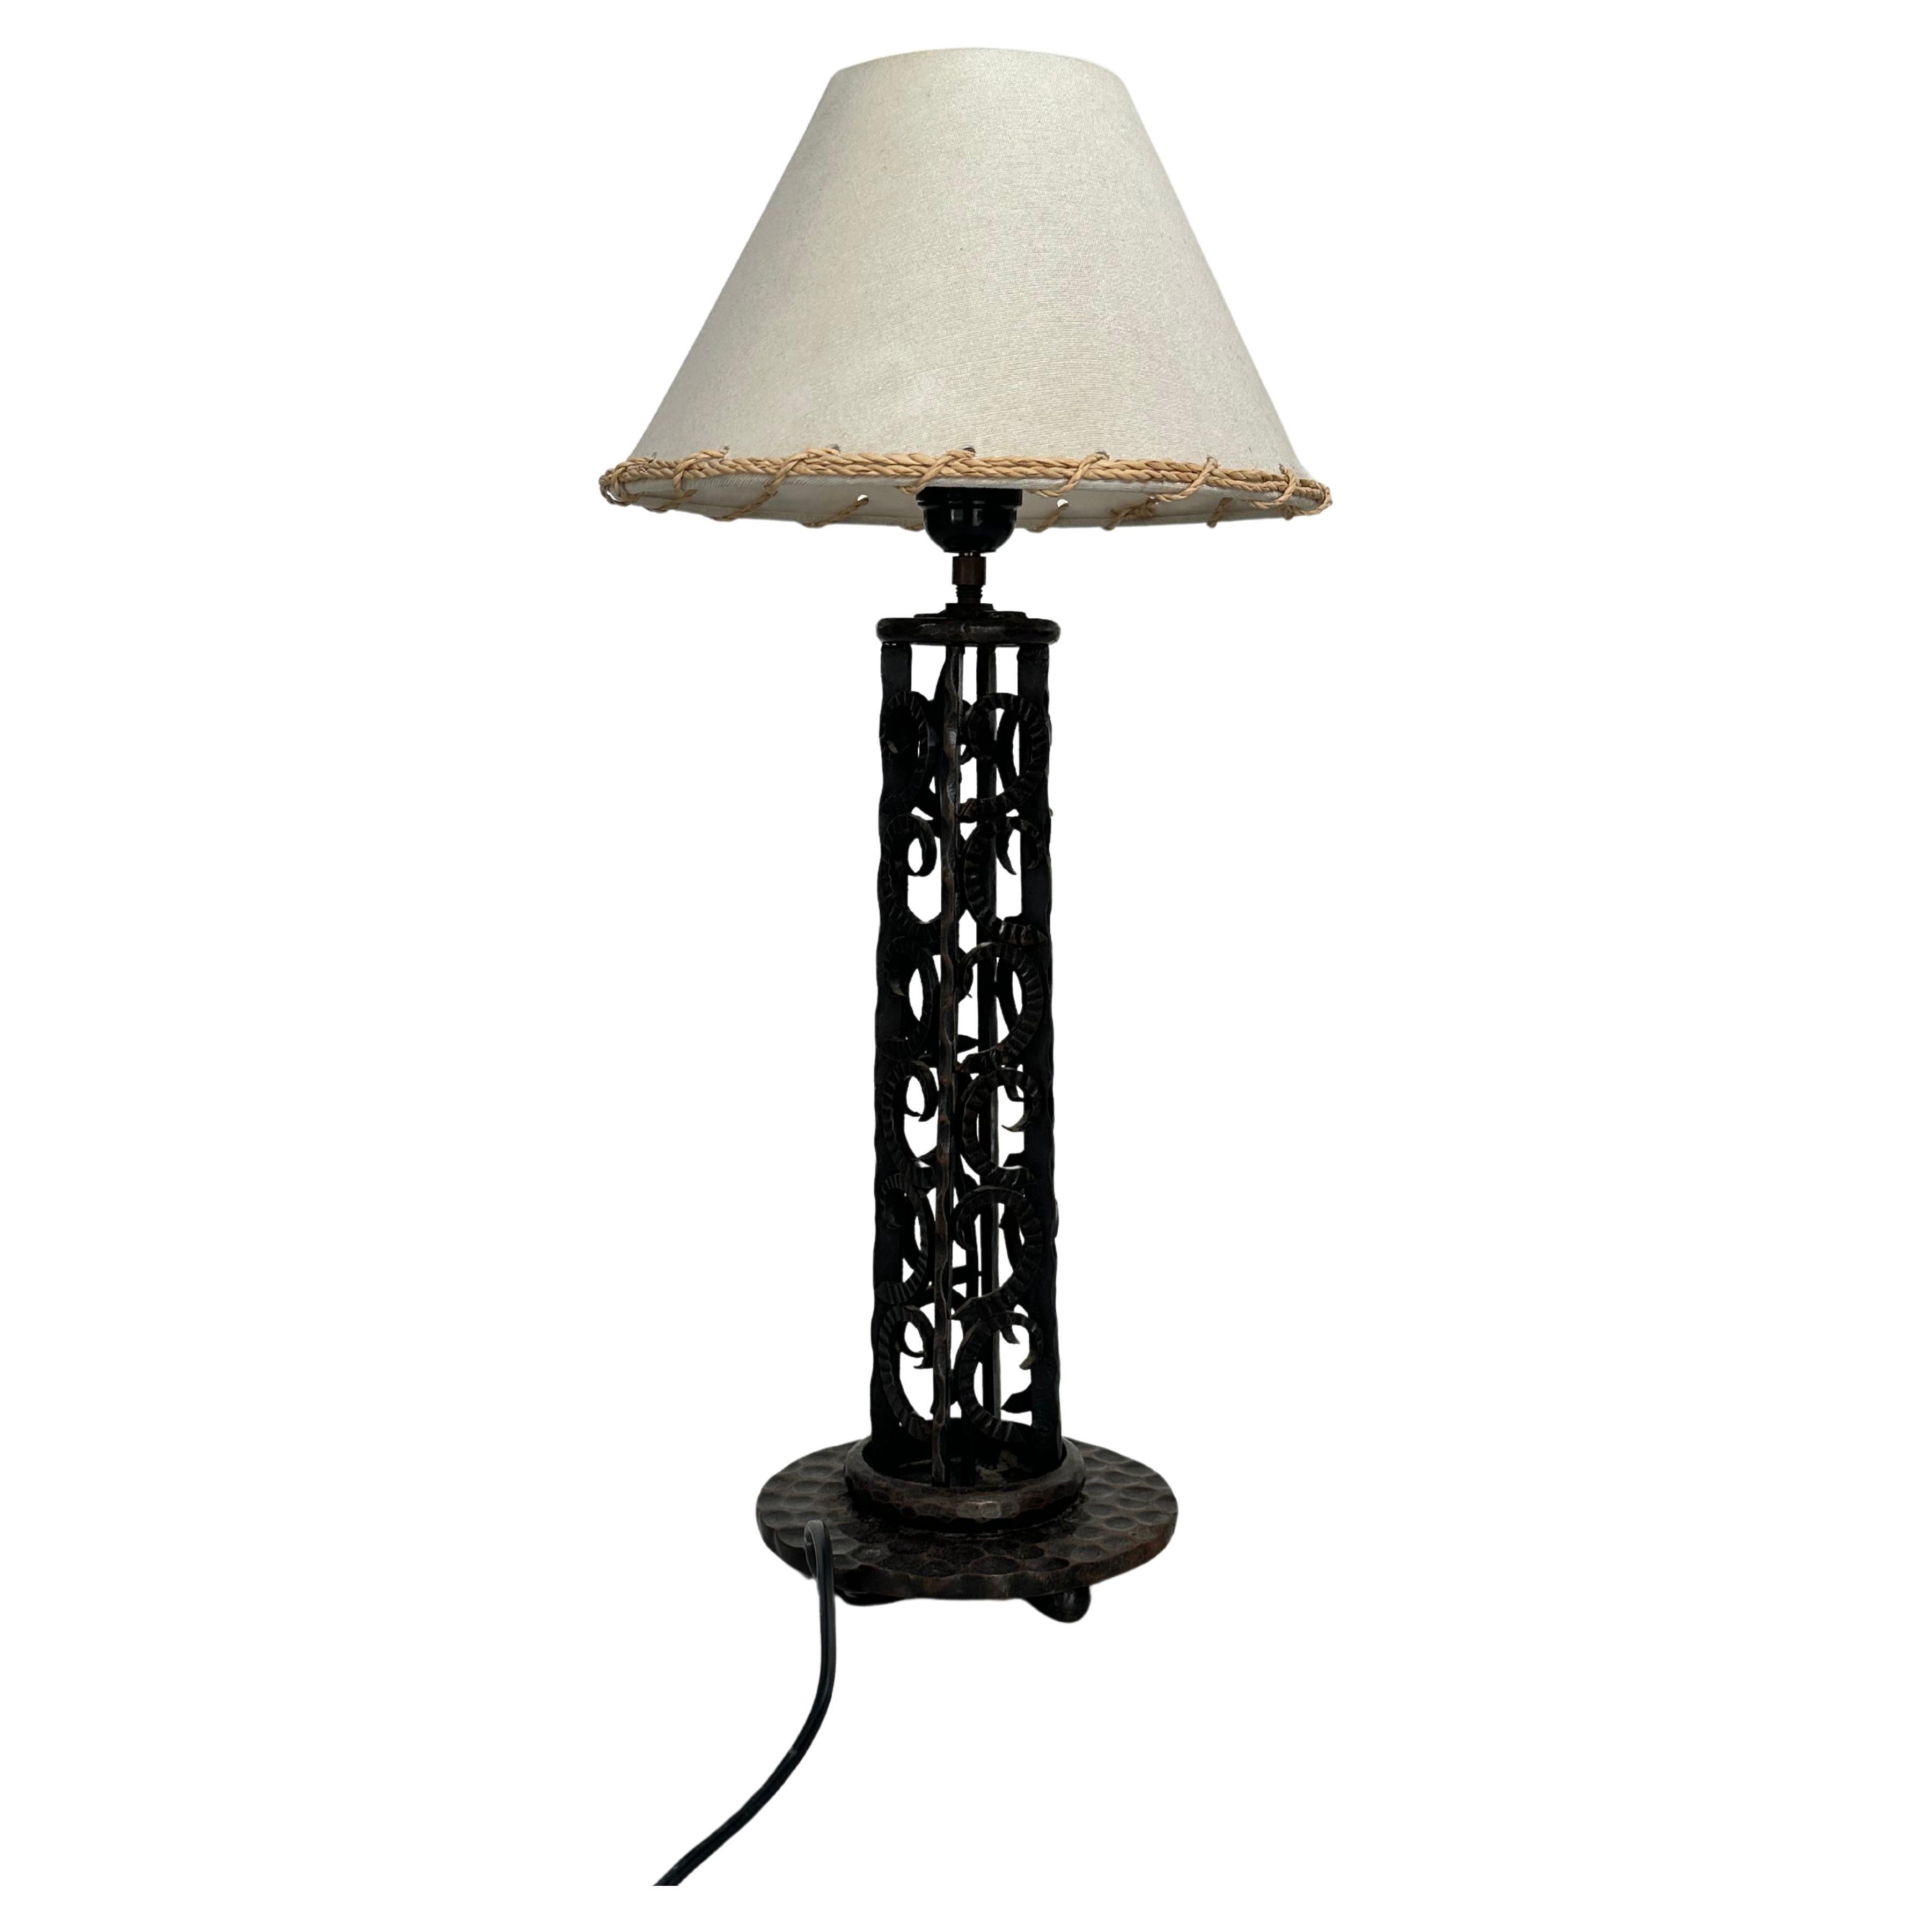 French Art Deco Wrought-iron table lamp, 1930s